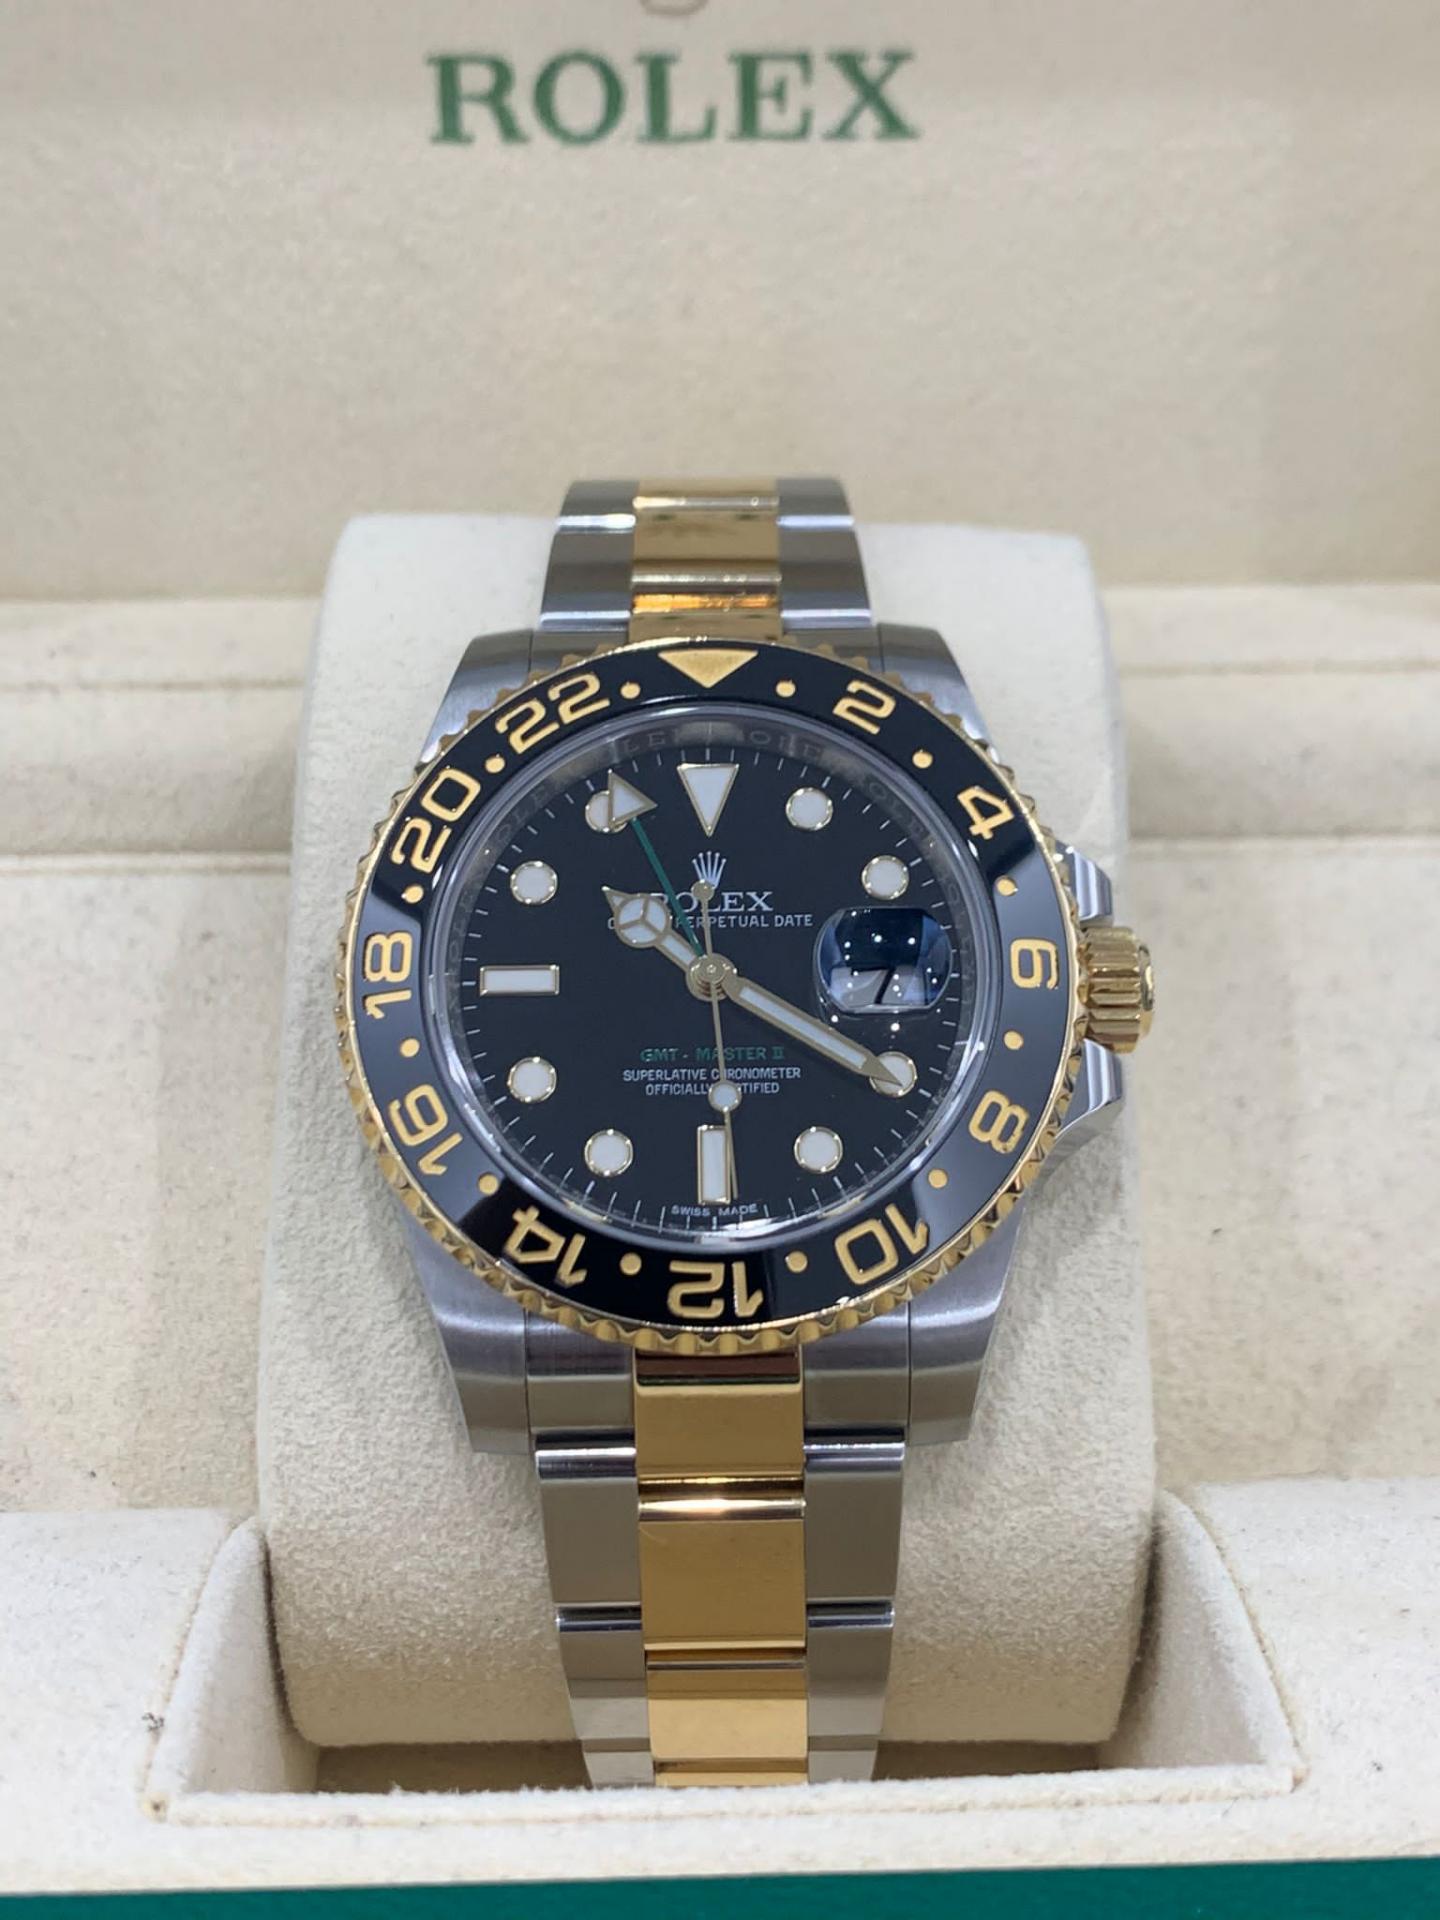 Rolex GMT-Master ll steel and gold discontinued full set ref. 116713LN from 2015 like new